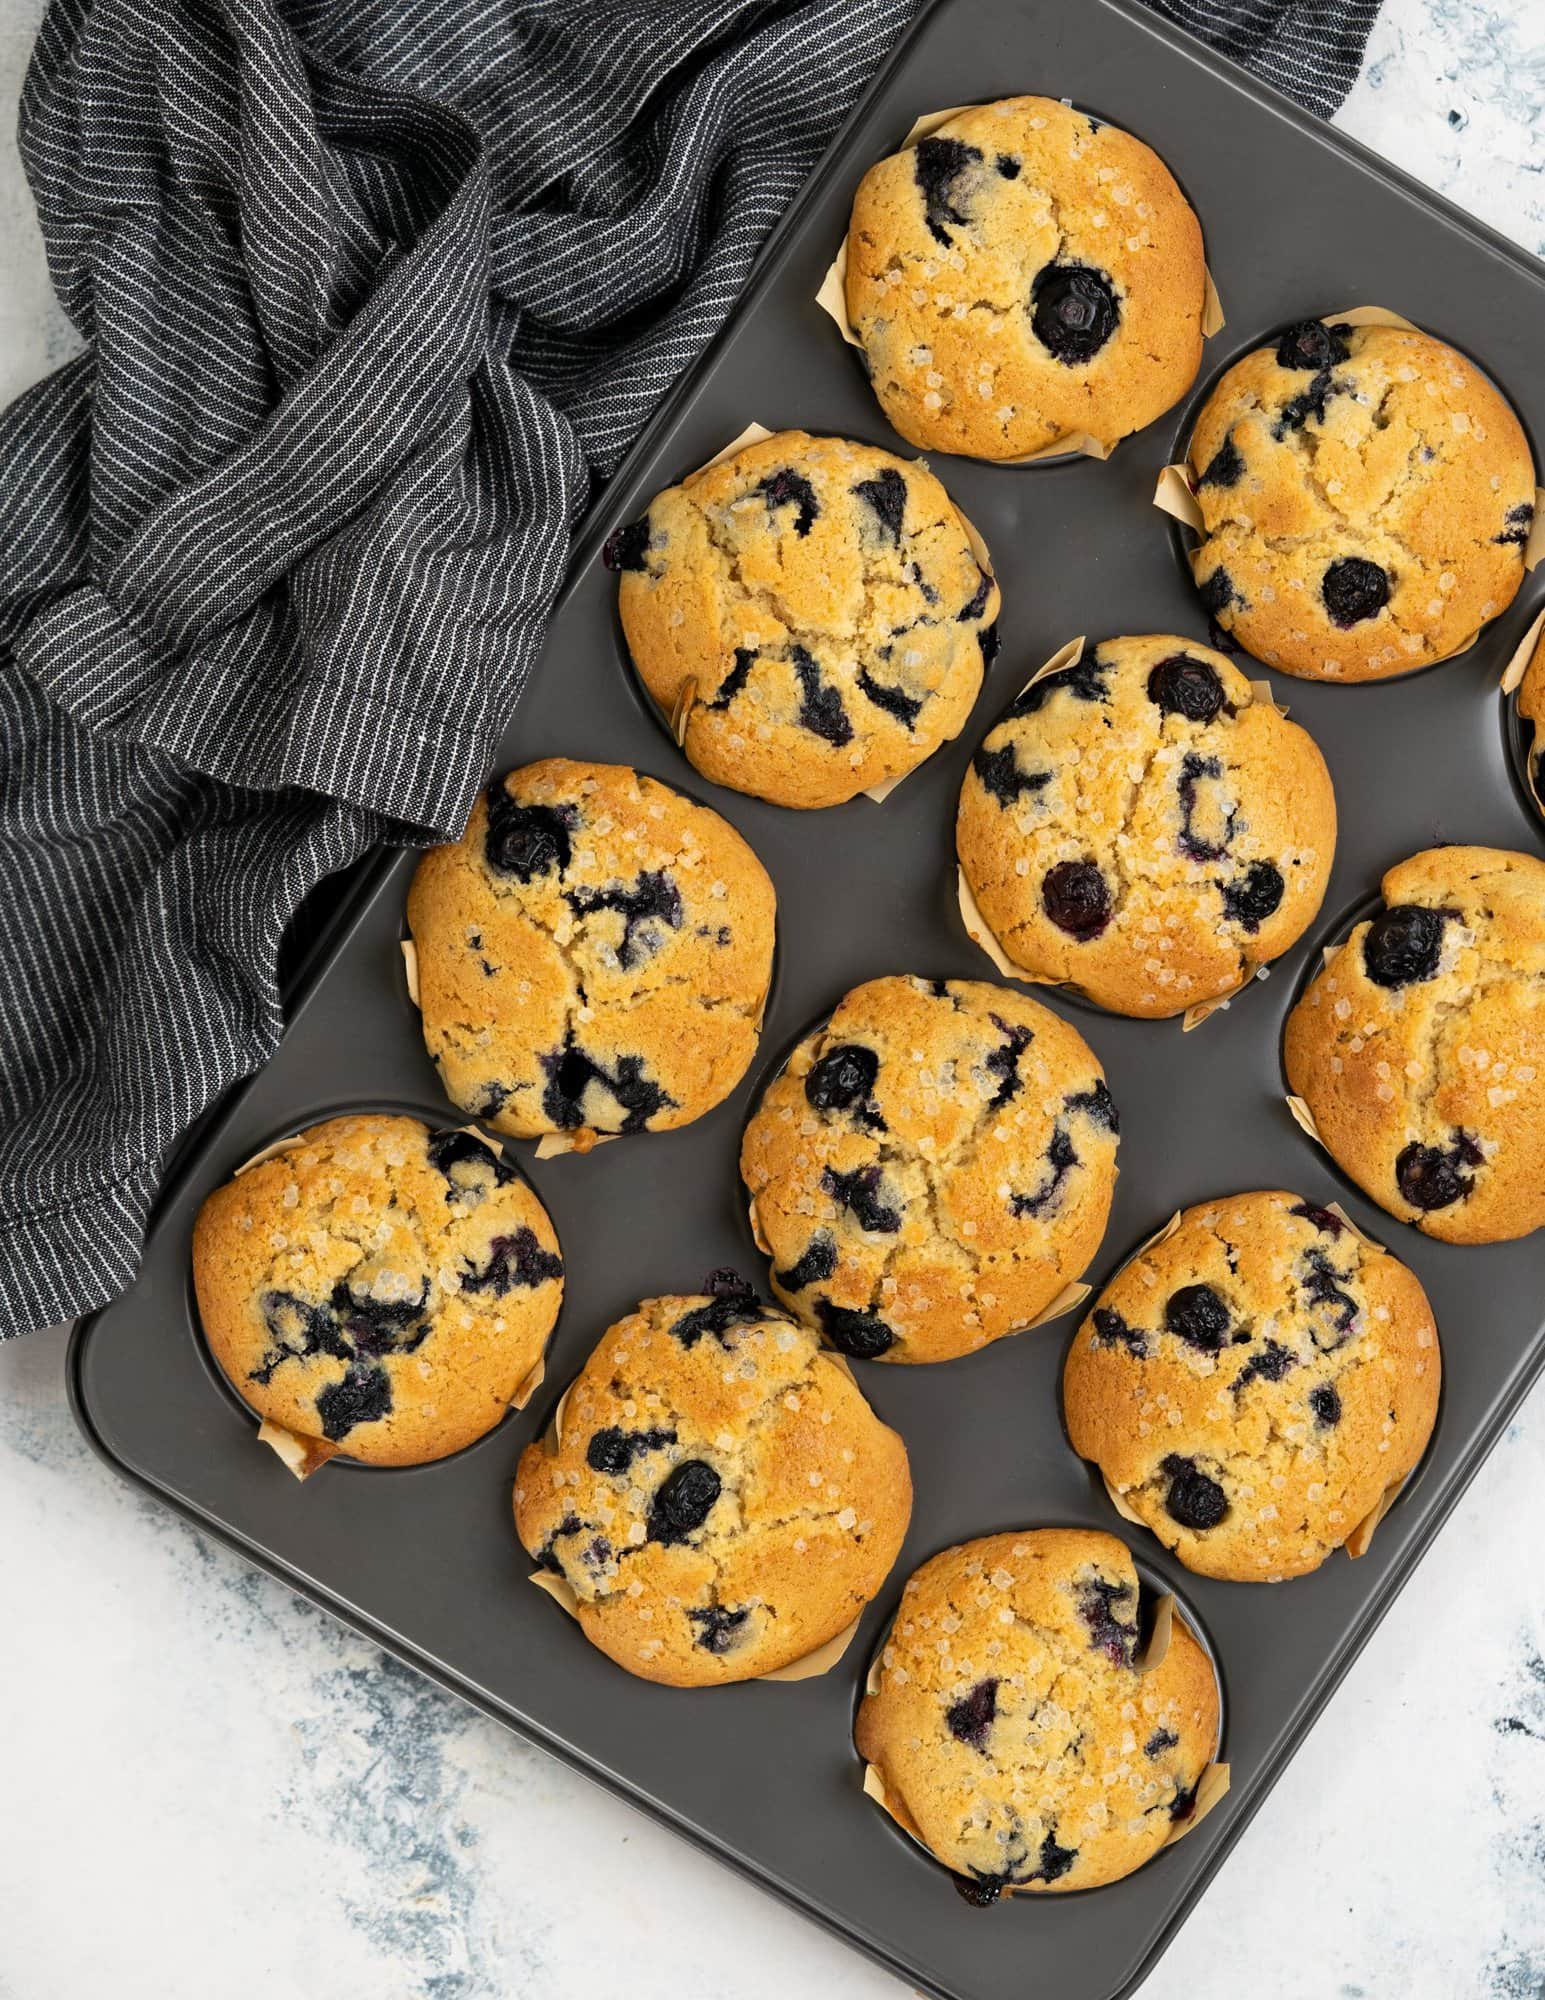 Baked blueberry muffins with crunchy sugar on top.